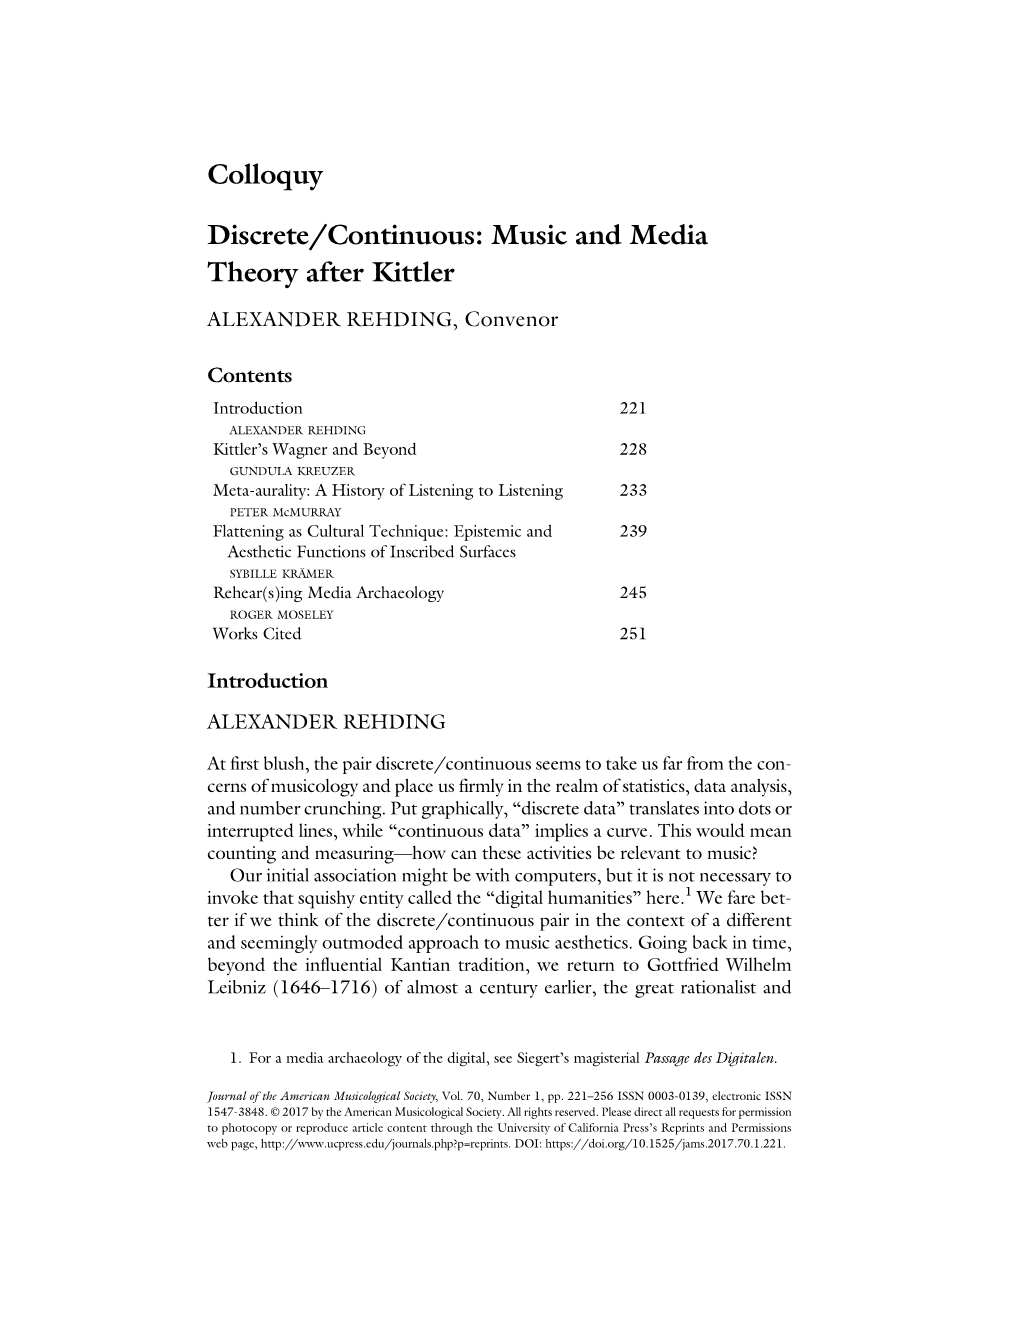 Colloquy Discrete/Continuous: Music and Media Theory After Kittler